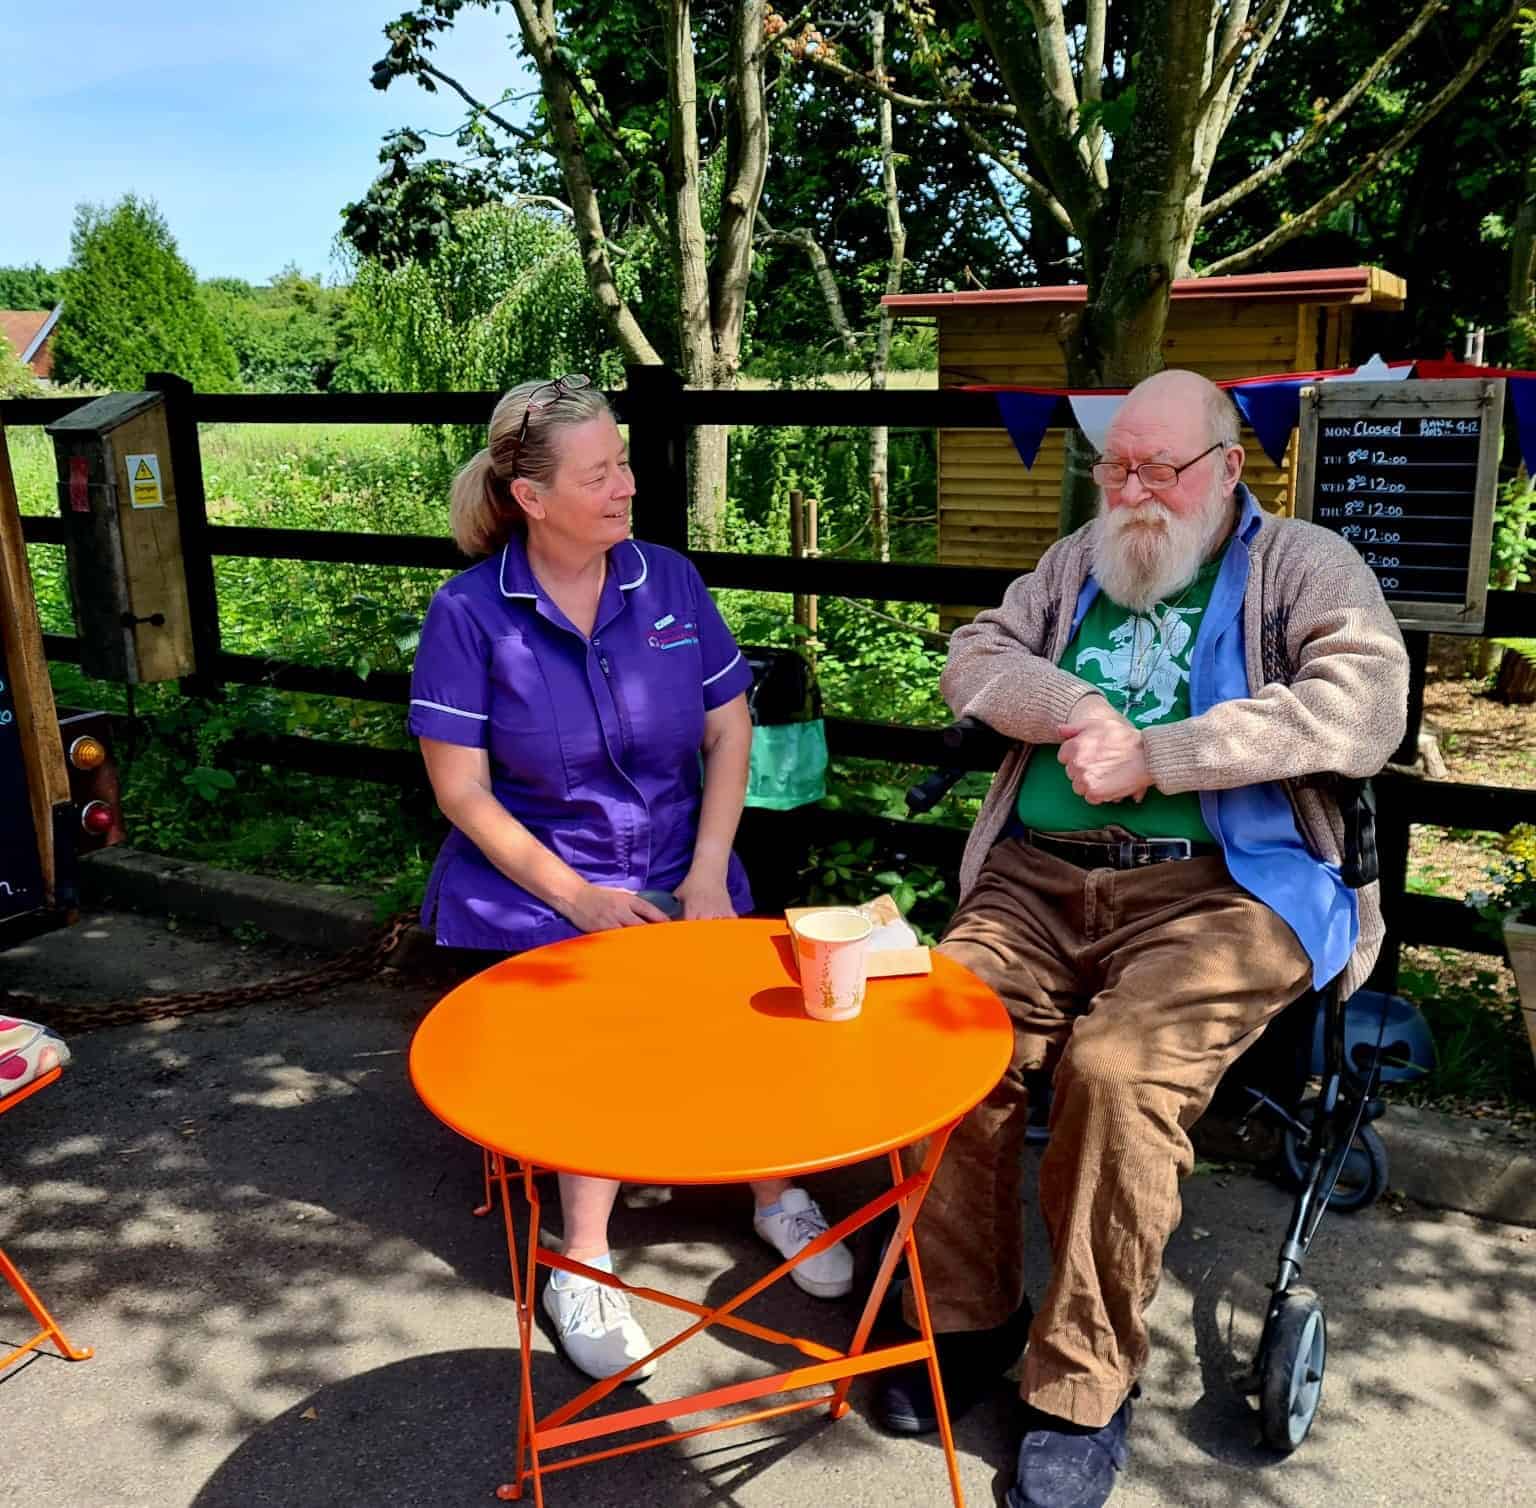 A caregiver in a purple uniform from Oxford House Community Care sits with a smiling elderly man with a white beard in a wheelchair, enjoying a sunny day outdoors with an orange table between them, a beverage on top